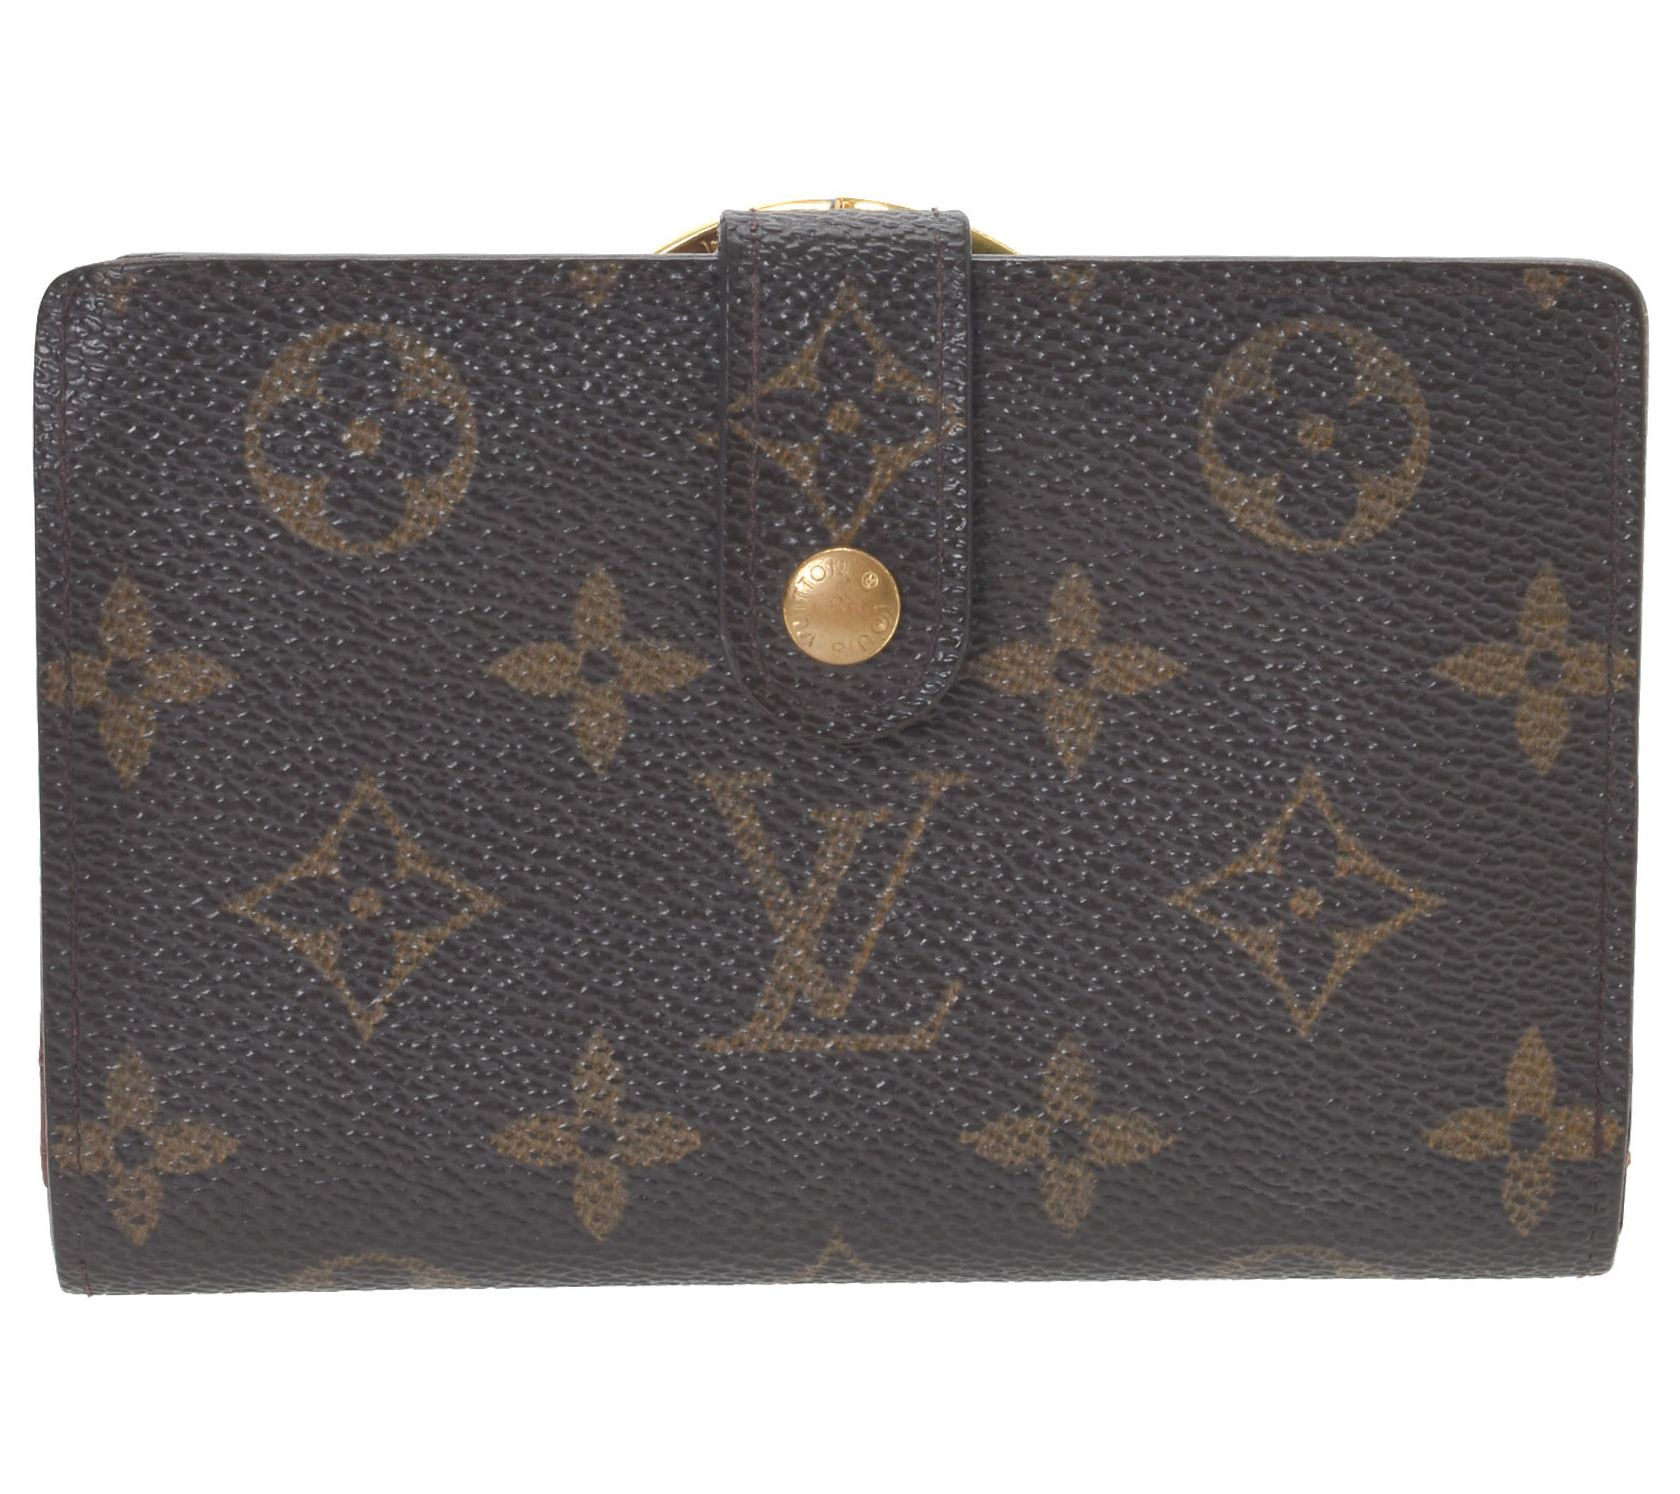 Pre-Owned Louis Vuitton French Purse Wallet 